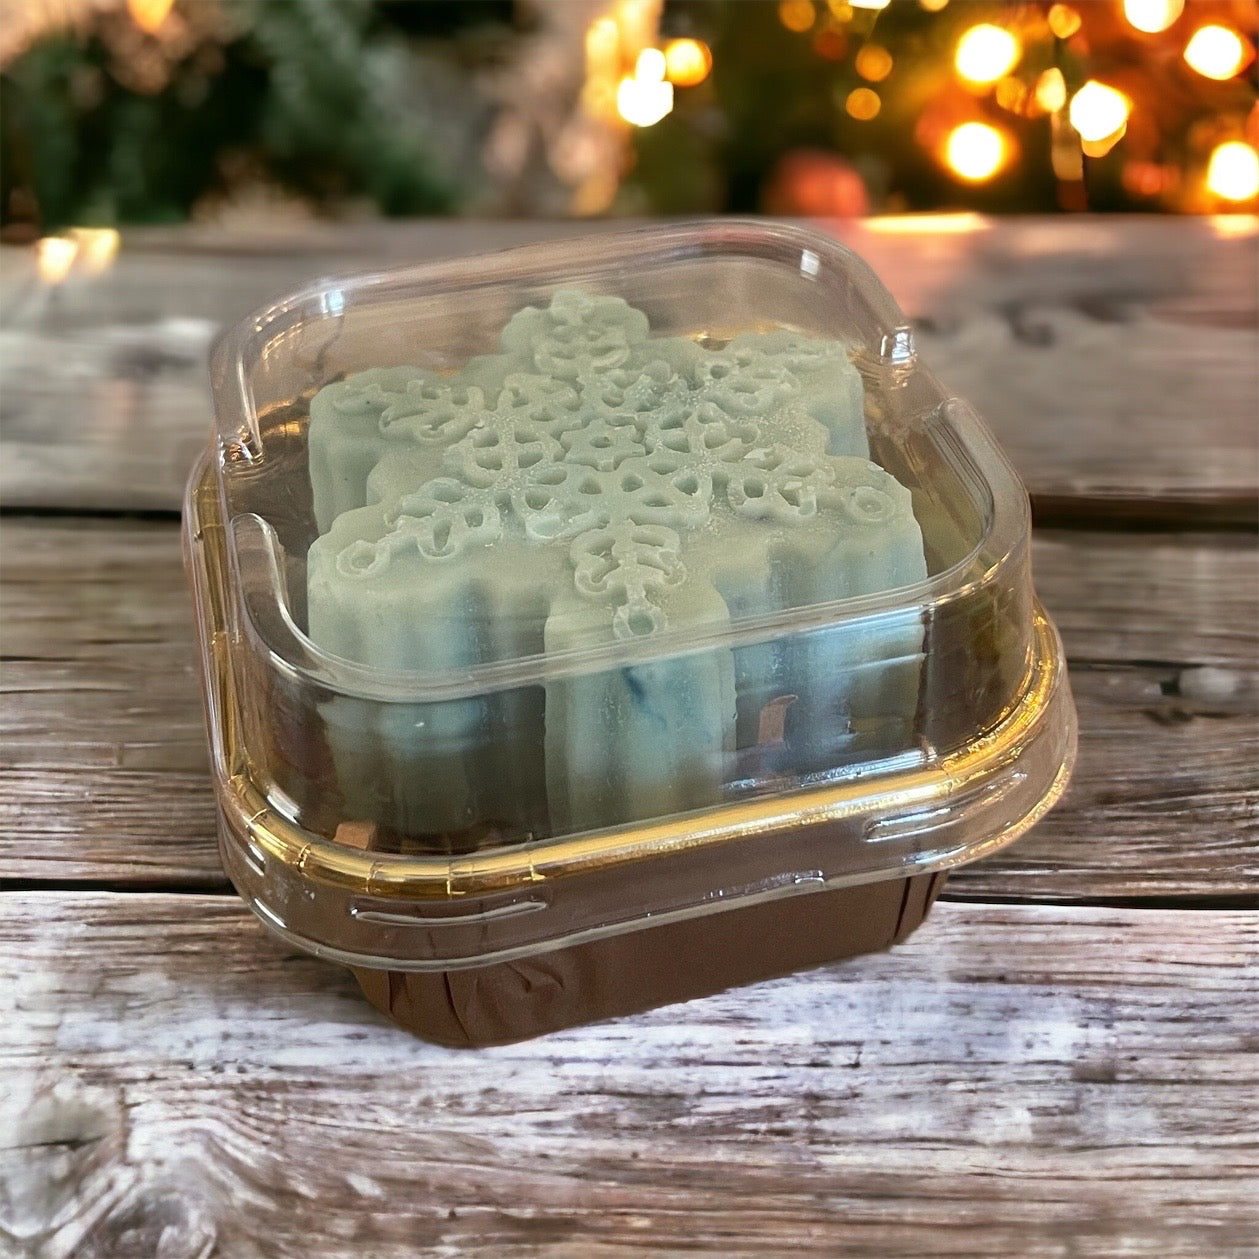 Goat Milk Soap | Winter Candy Apple Snowflake Soap | Handmade, Handcrafted Soap